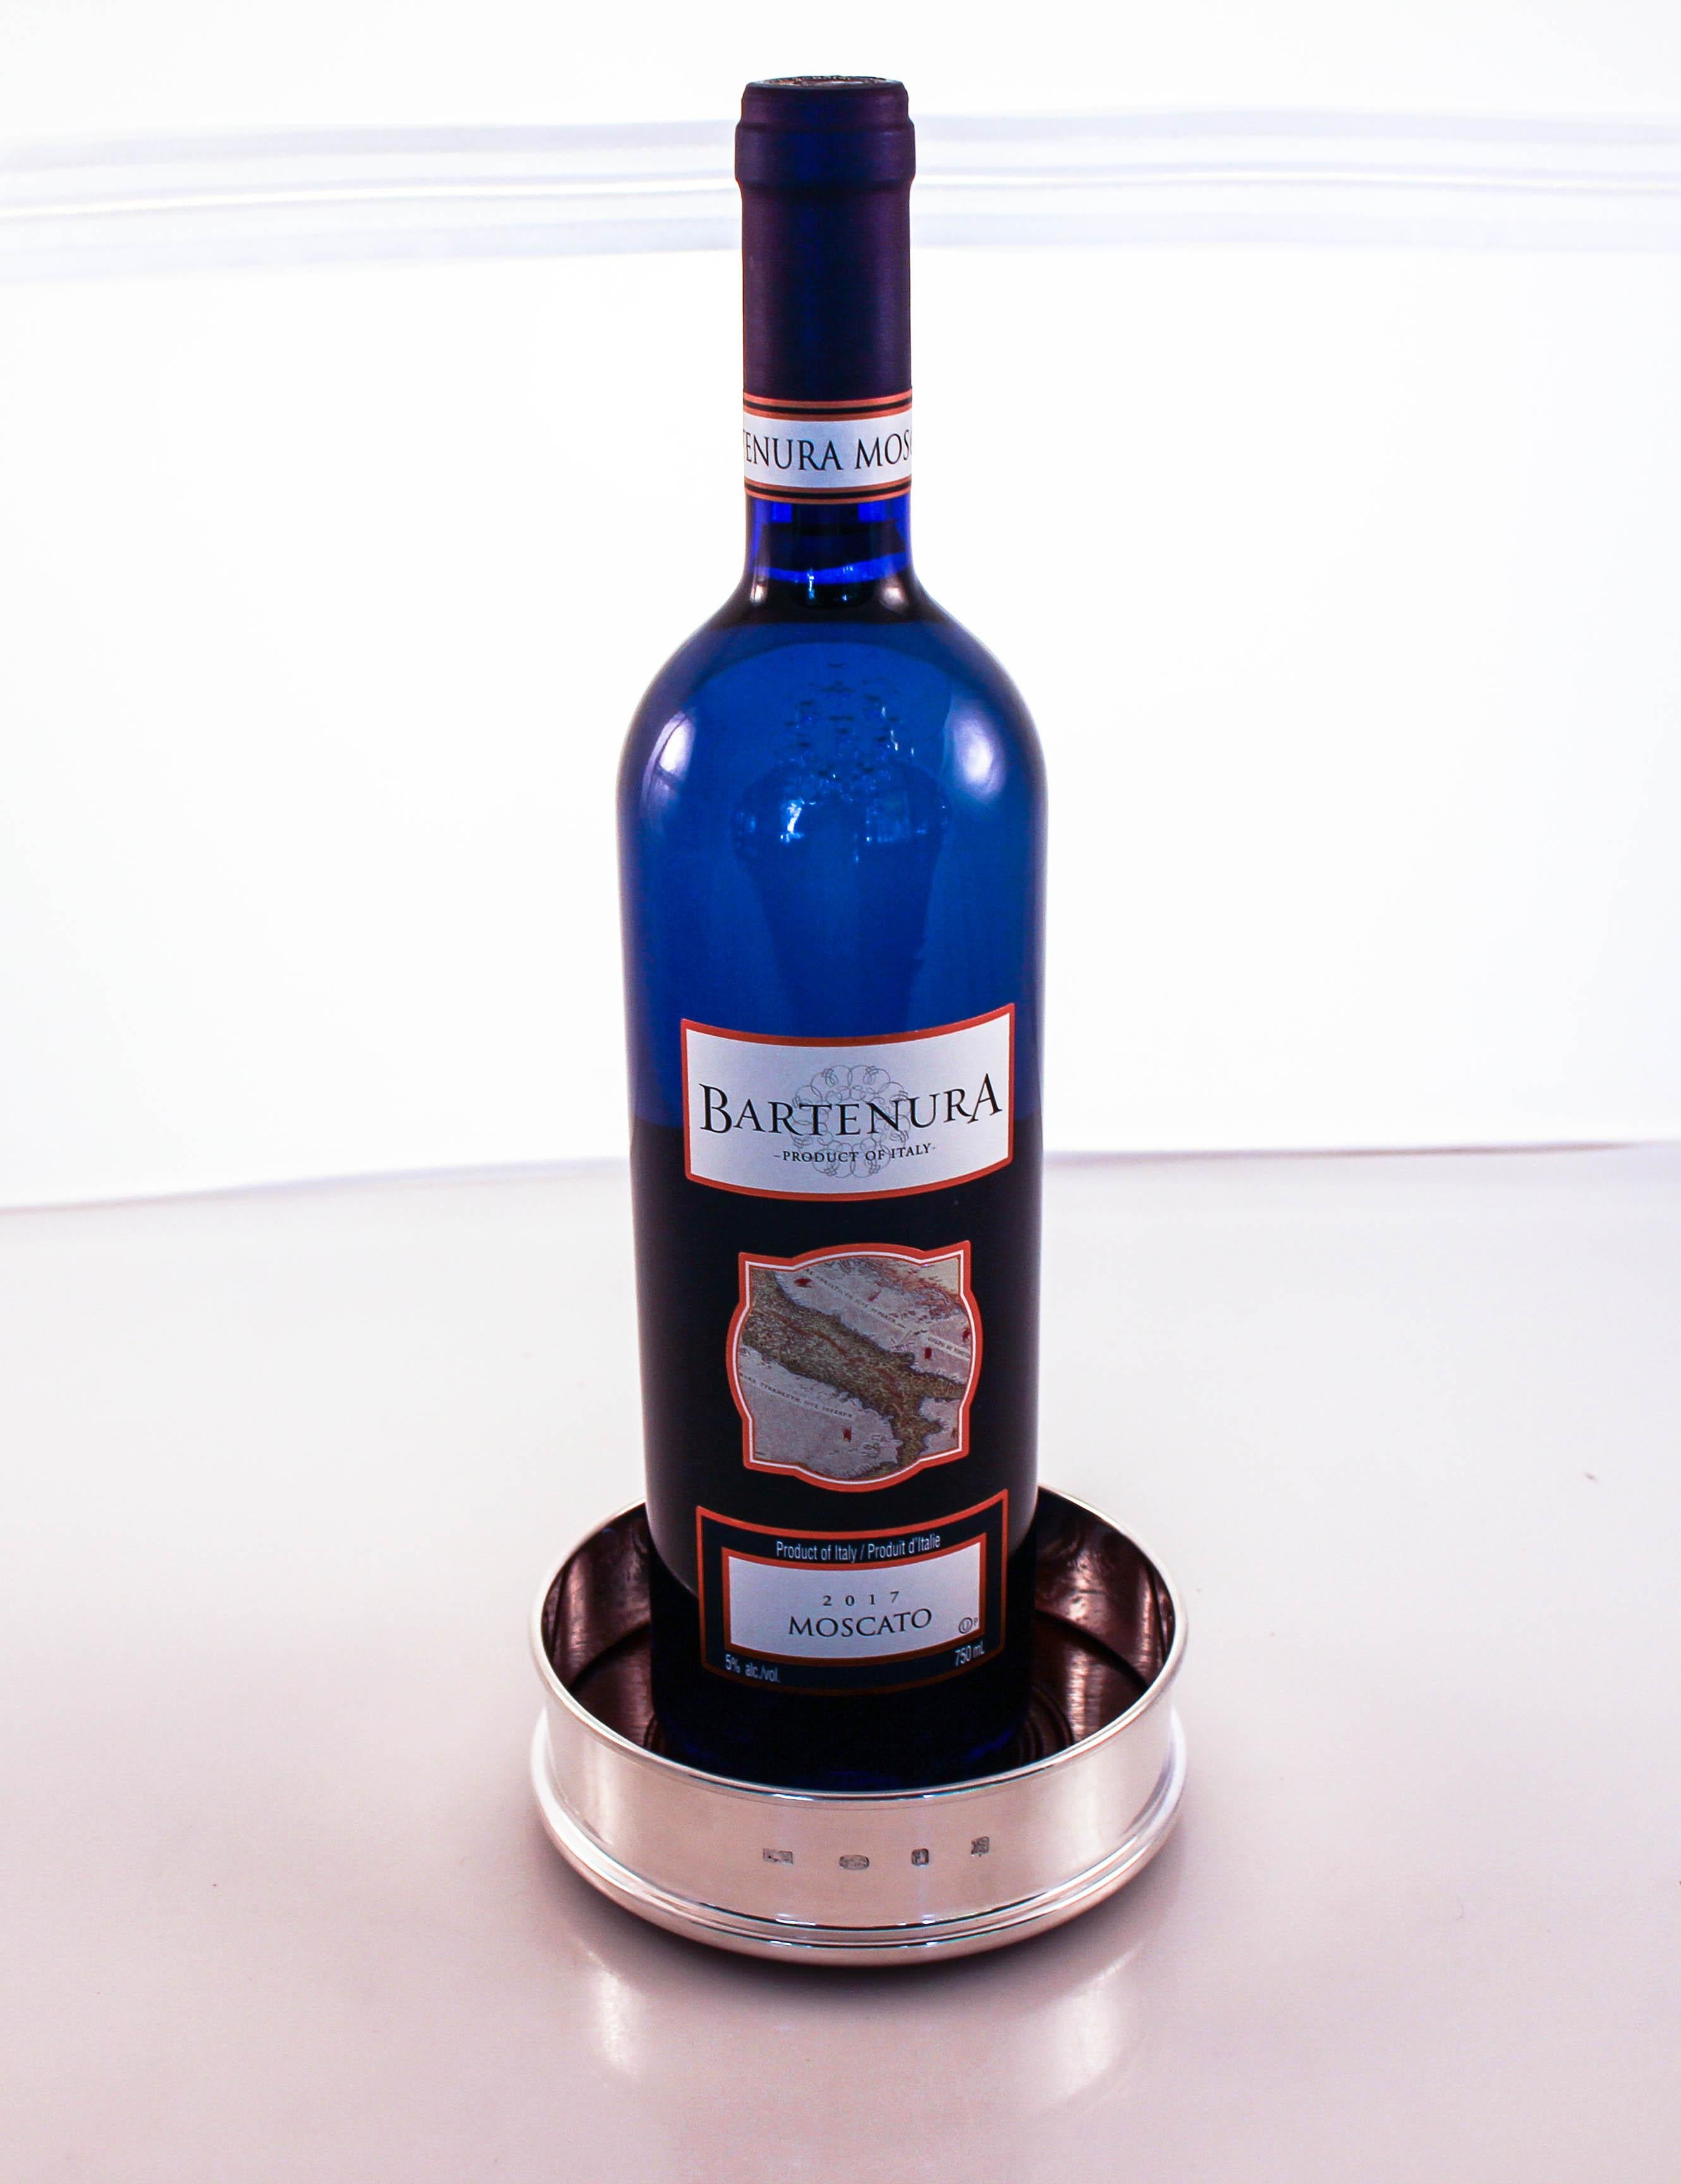 We are delighted to offer this sterling silver wine coaster. It is new and made in England. It has a tall rim that envelopes the bottle with a wood bottom and again sterling in the center. Go ahead and dress up your dining room table with this